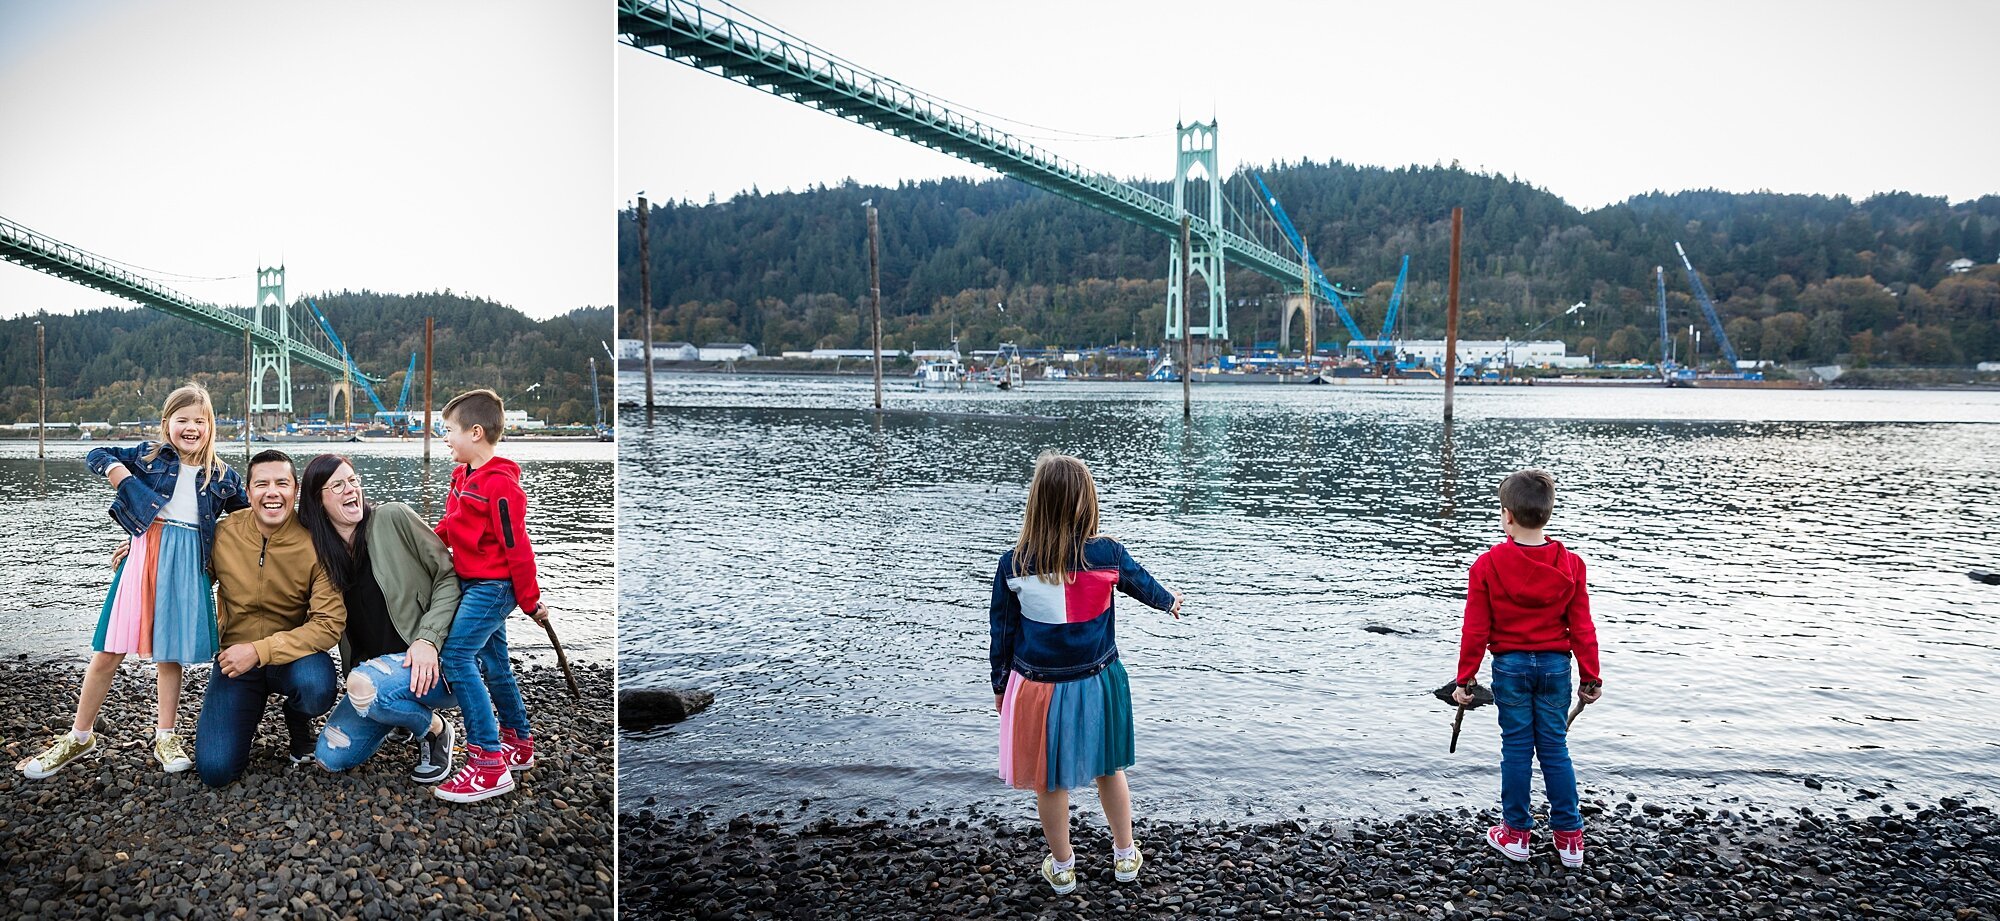 Cathedral_Park_Waterfront_Family_Session_Hunnicutt_Photography_Portland_Oregon_0024.jpg